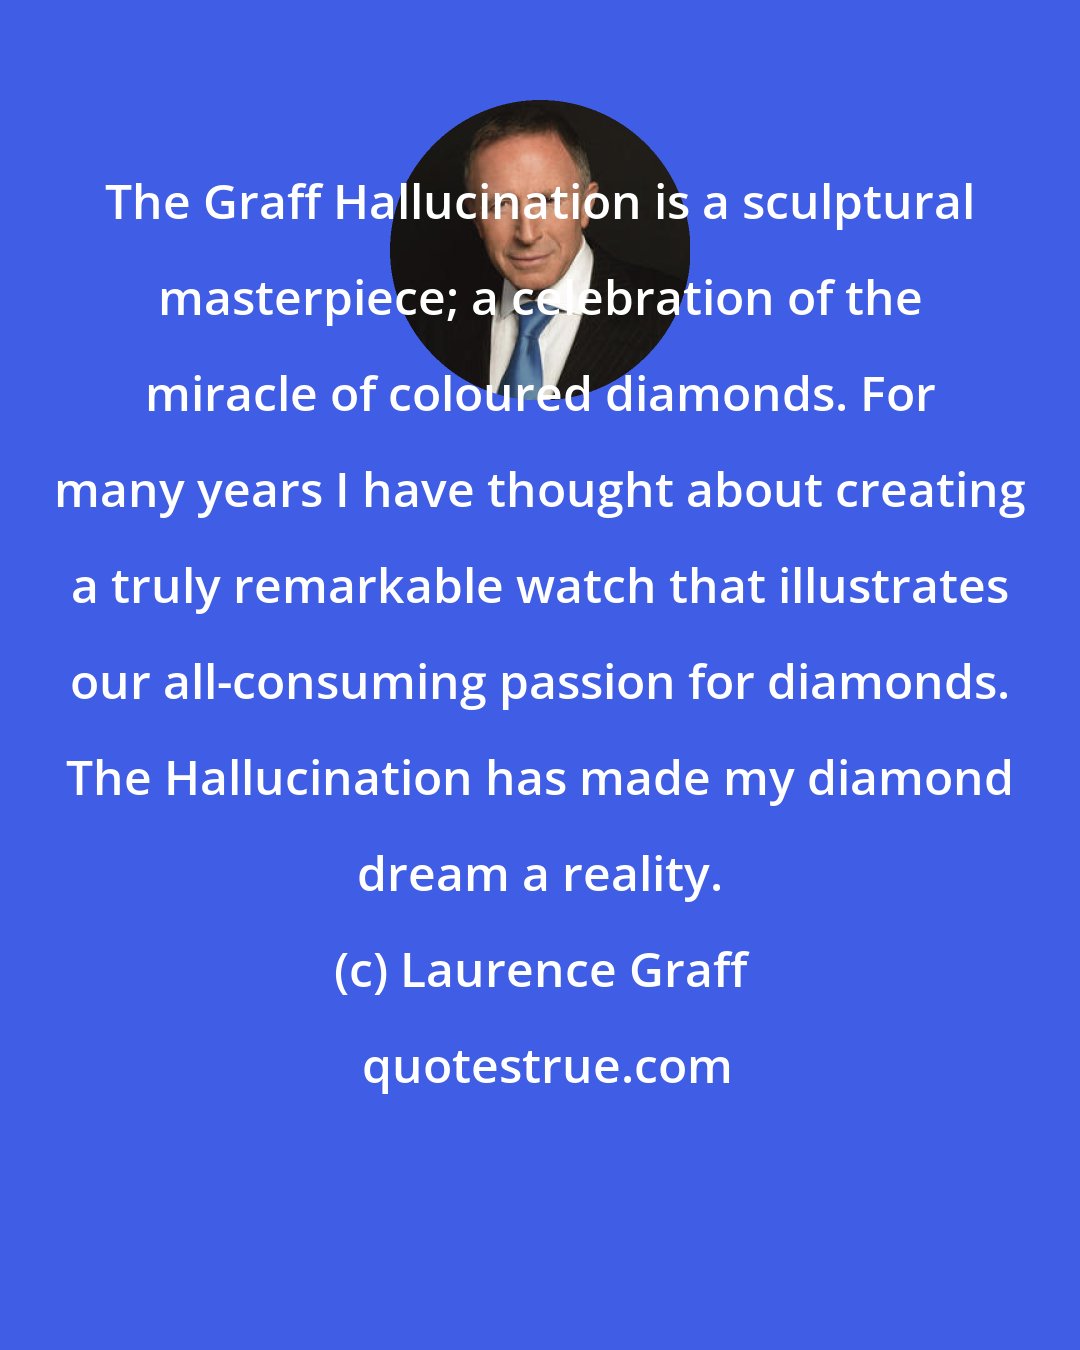 Laurence Graff: The Graff Hallucination is a sculptural masterpiece; a celebration of the miracle of coloured diamonds. For many years I have thought about creating a truly remarkable watch that illustrates our all-consuming passion for diamonds. The Hallucination has made my diamond dream a reality.